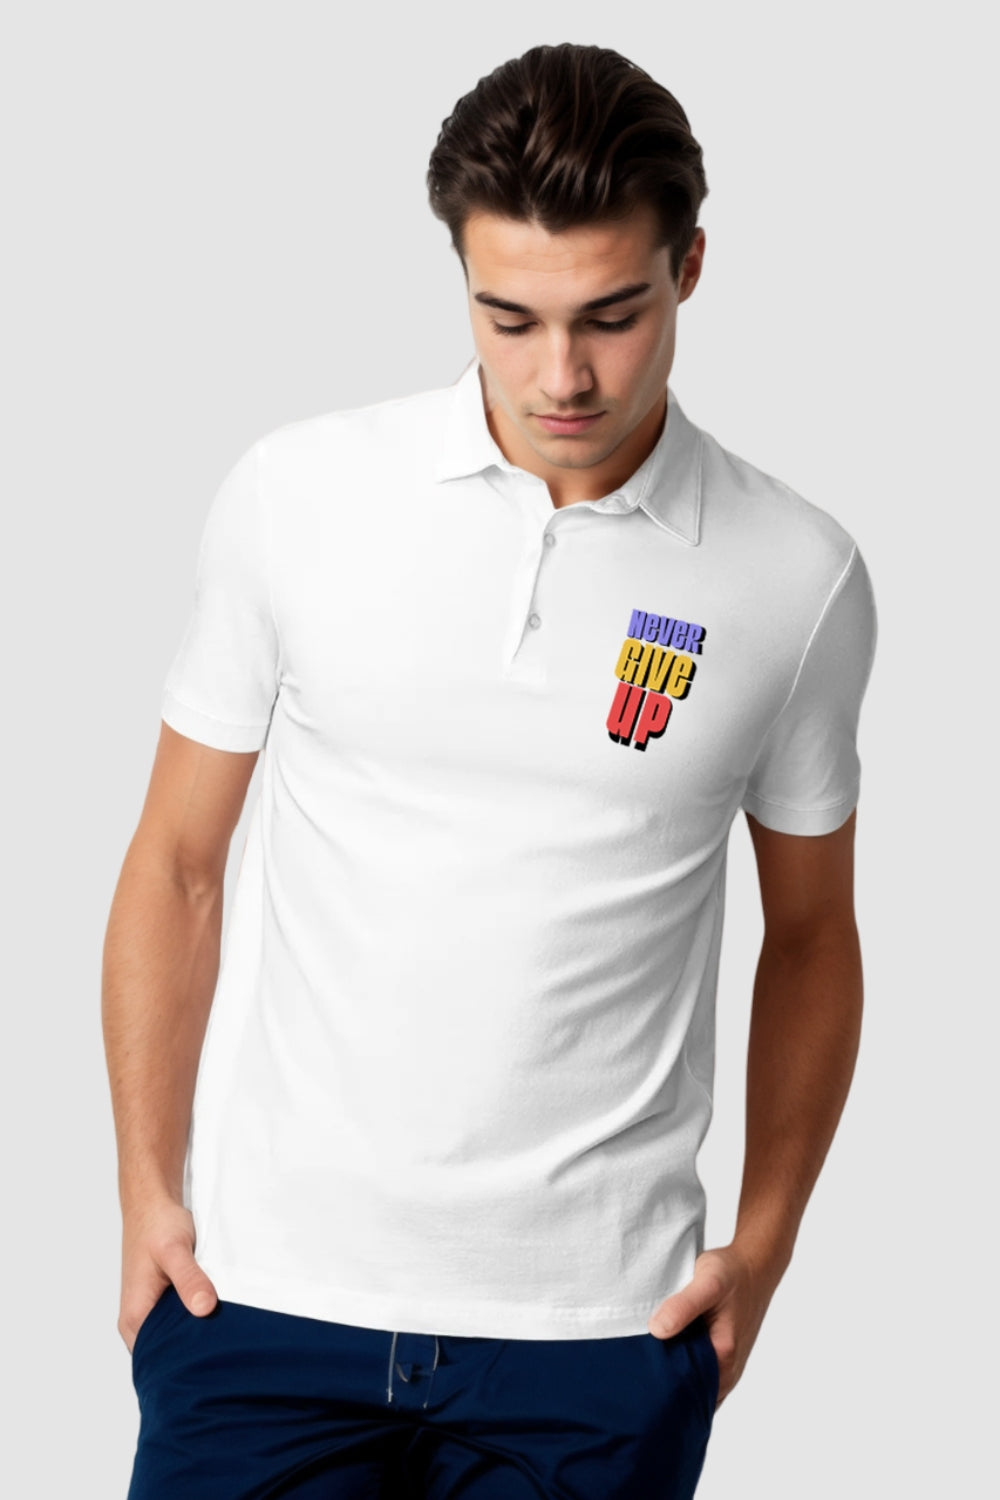 Never Give Up Pocket Printed White Polo Tshirt